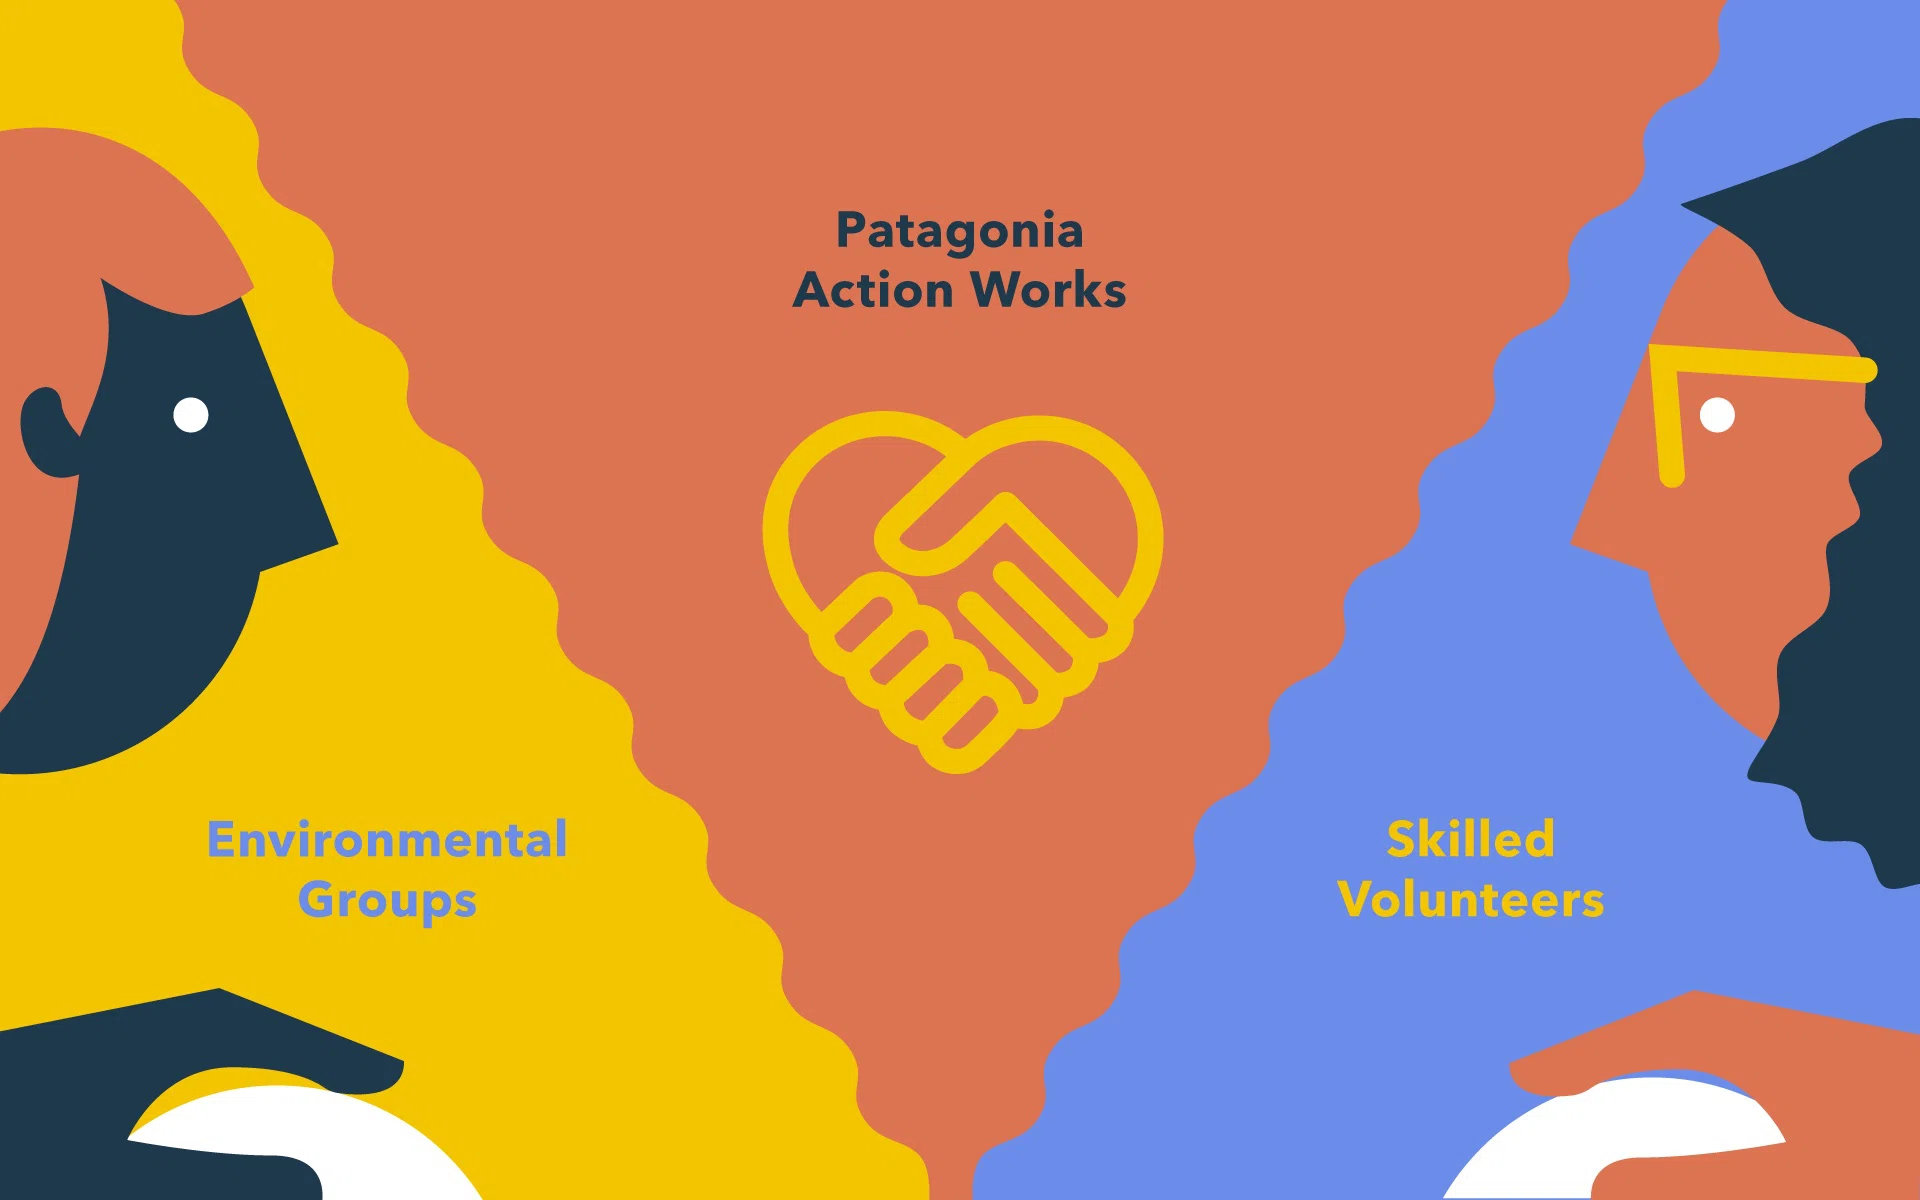 Patagonia Action Works connects creatives with organisations to action against issues